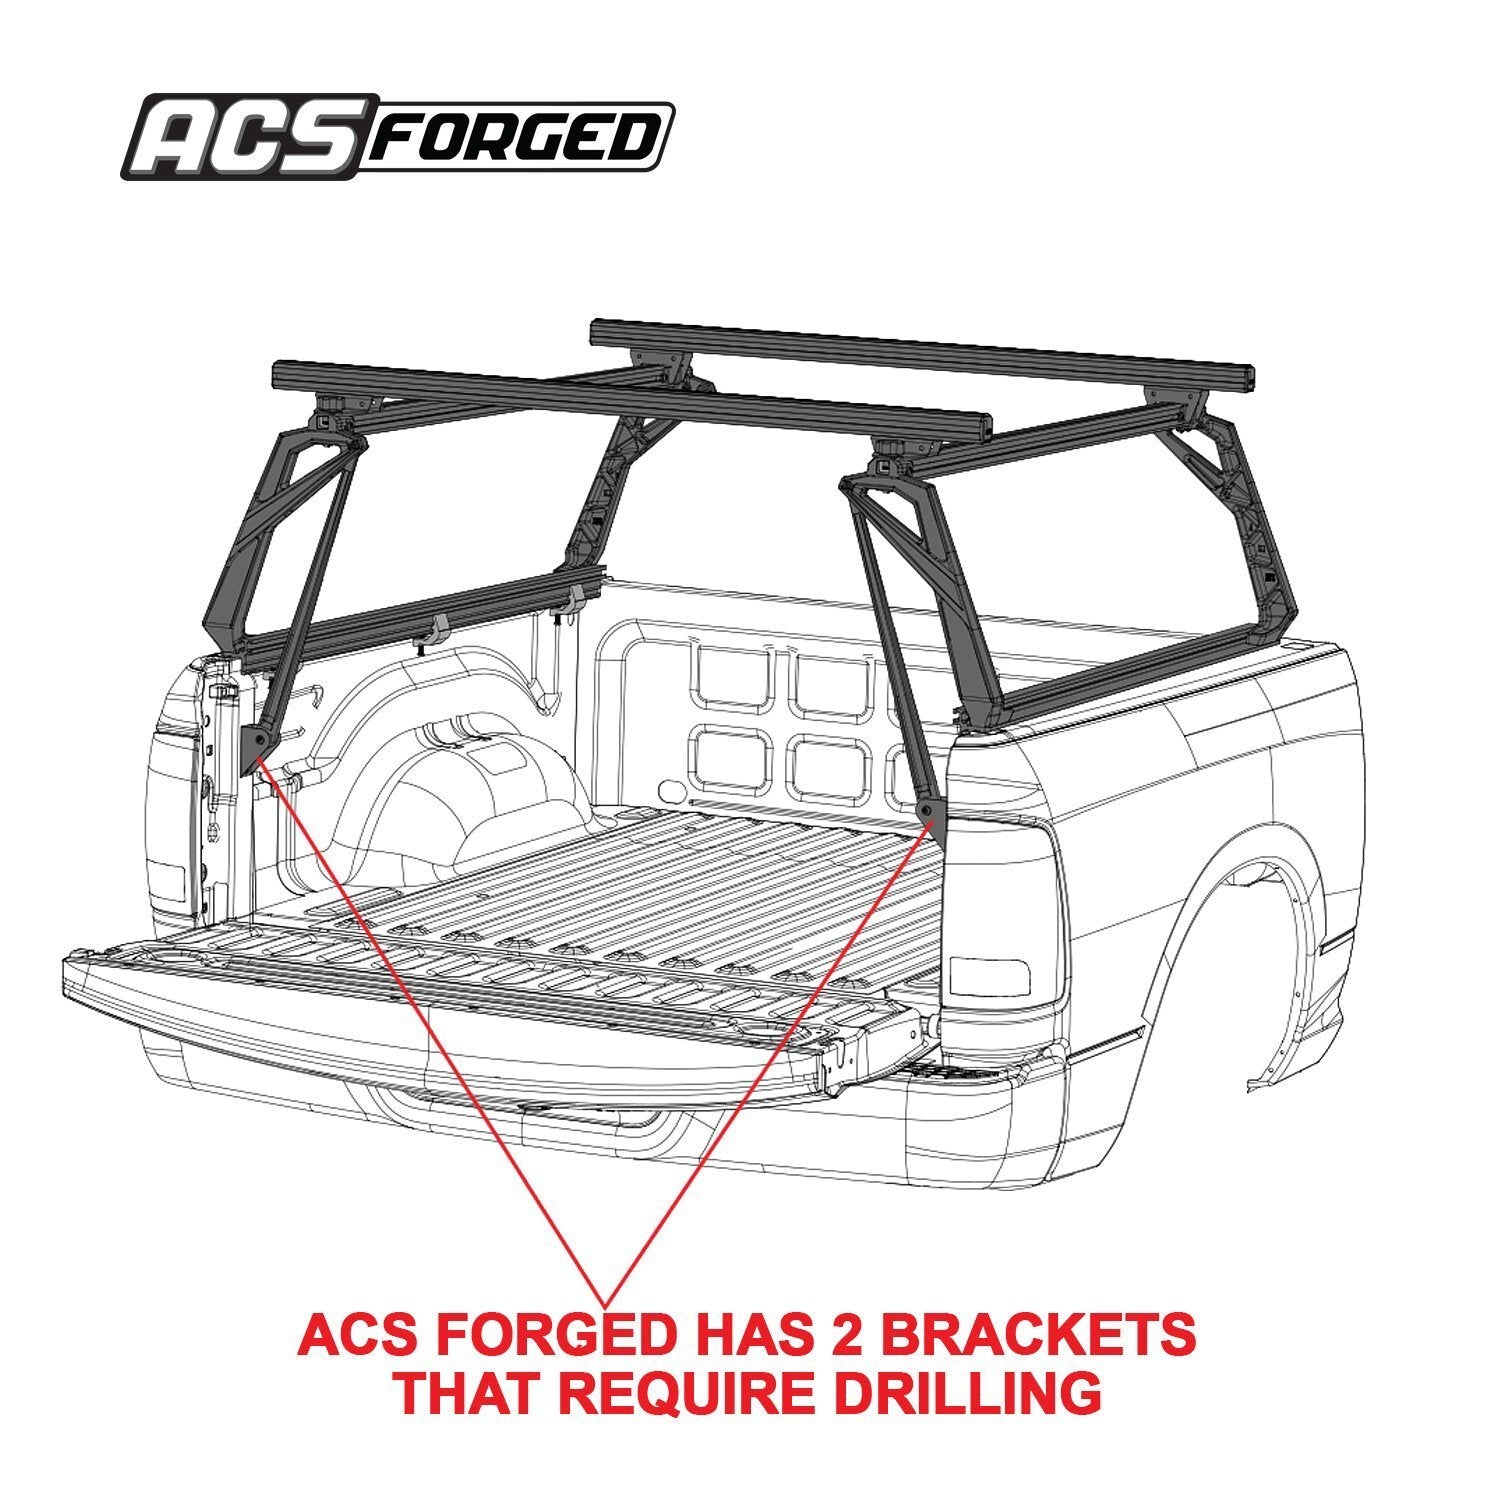 '01-06 Toyota Tundra-ACS Forged Bed Accessories Leitner Designs design design